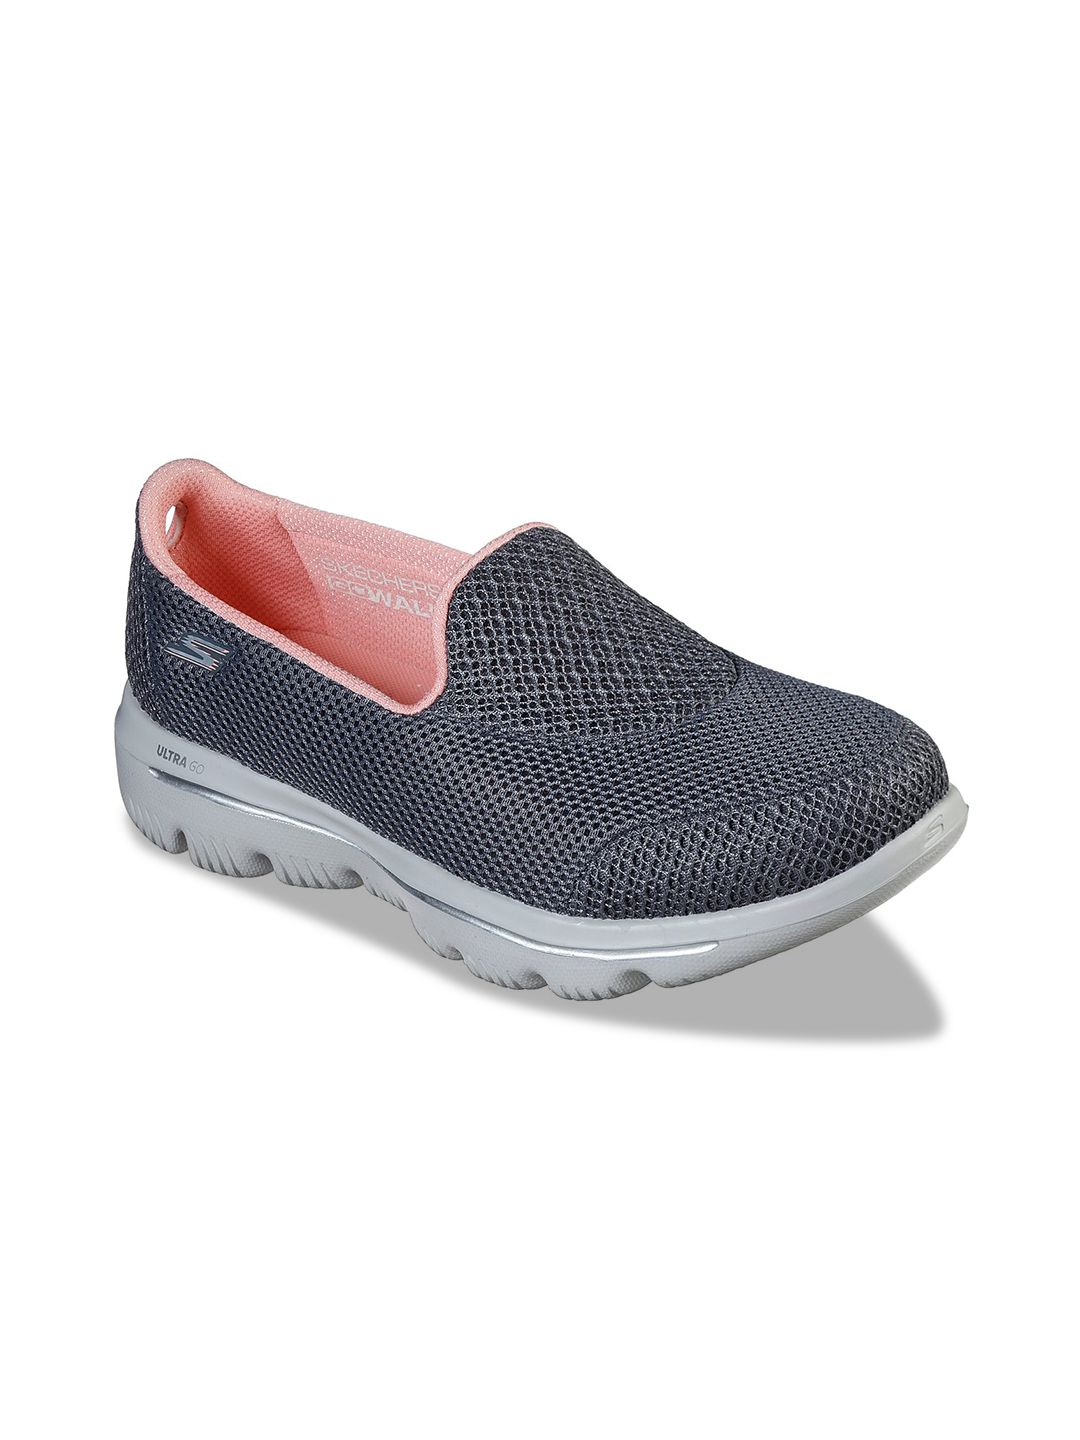 Skechers Women Charcoal Sports Shoes Price in India